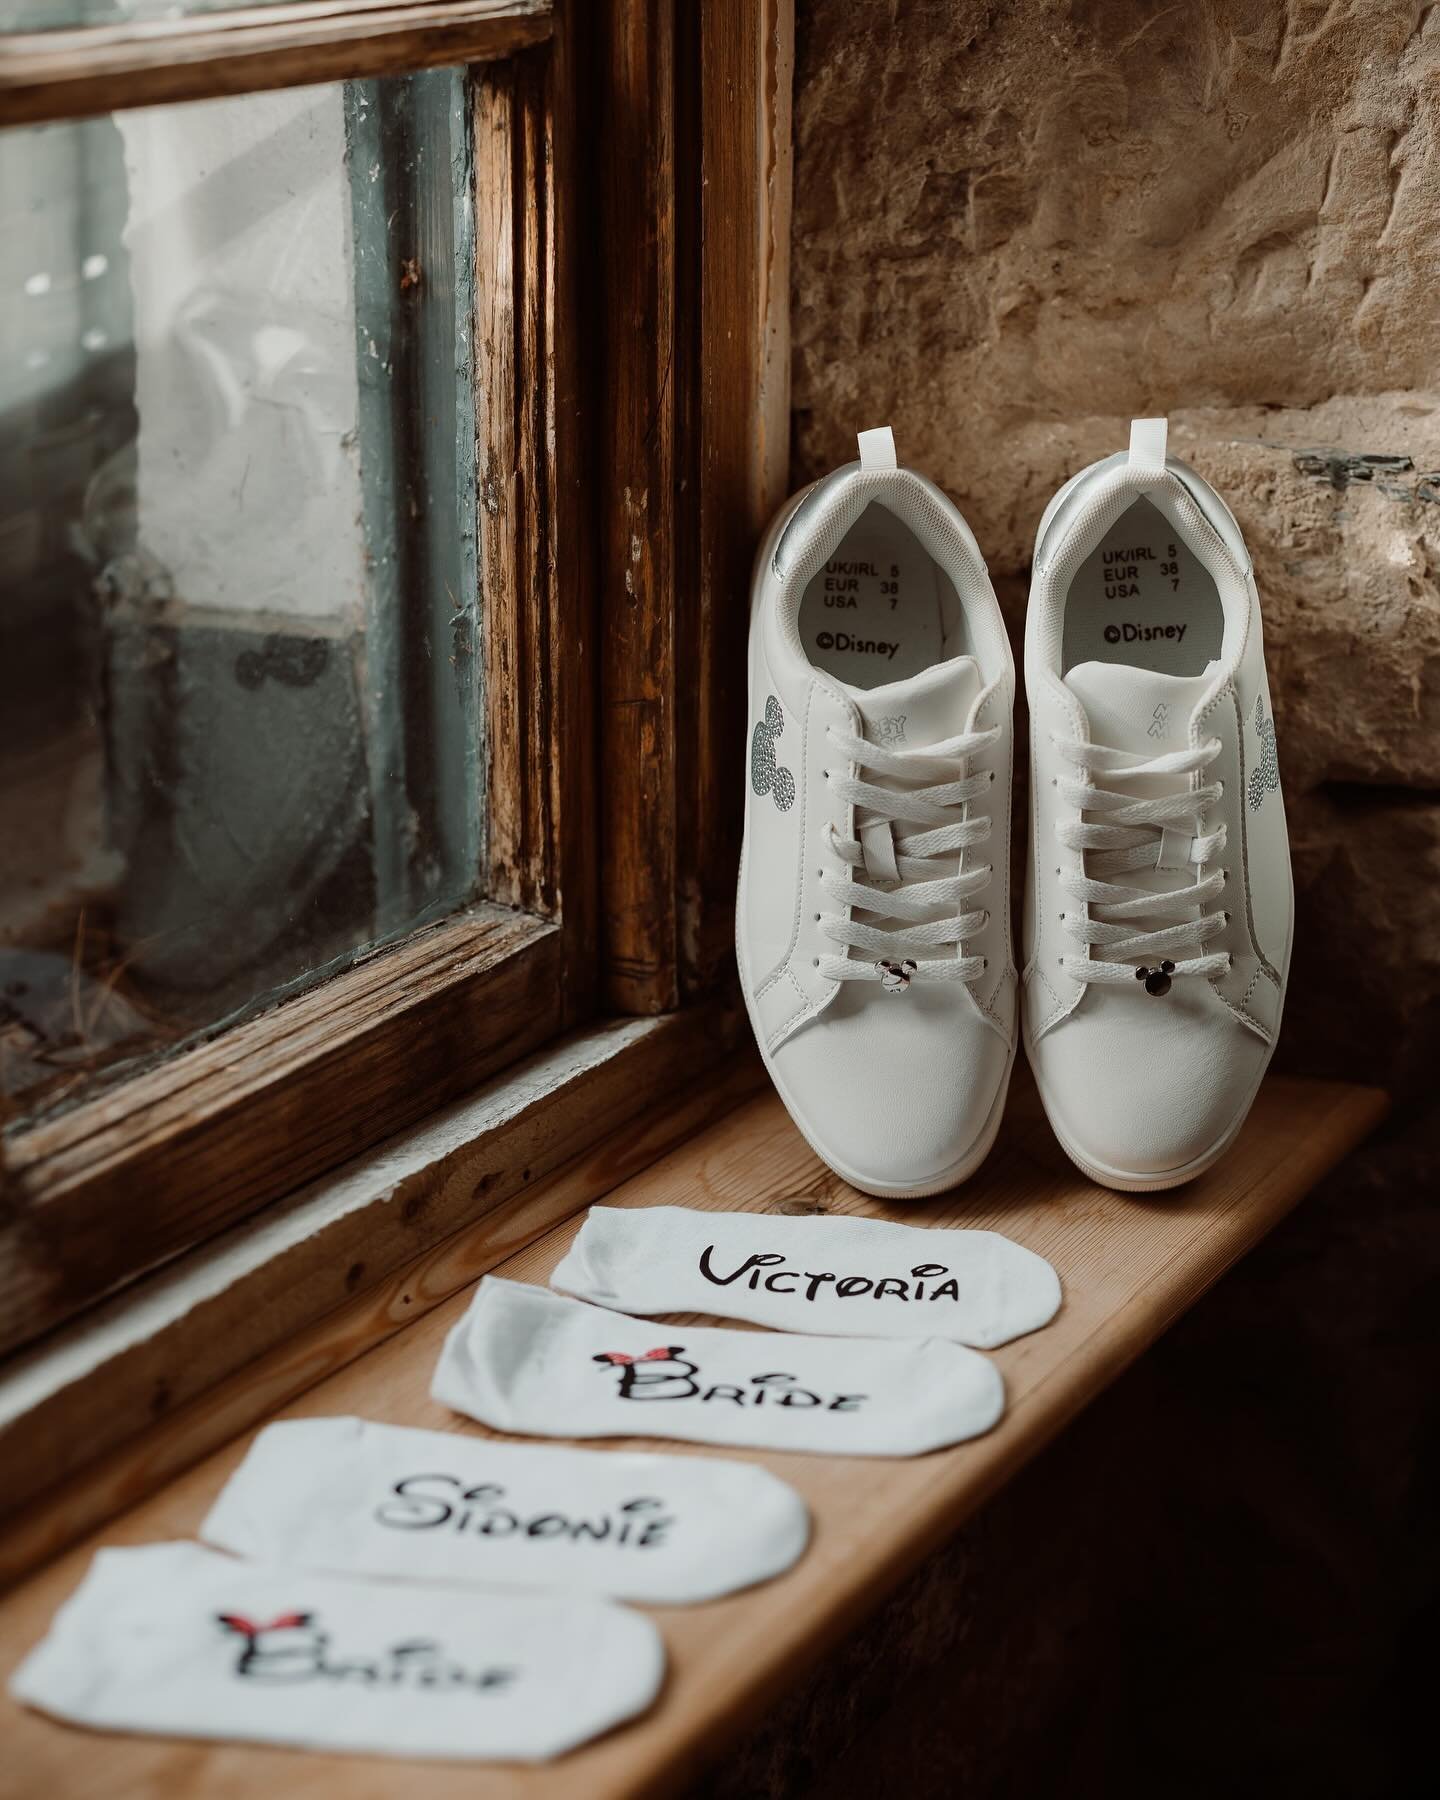 V&amp;S&rsquo;s weddings was themed around Disney which was so fun!

The shoes and socks were my absolute favourite. But there was plenty of Disney details throughout the wedding venue and plan. Super lush for any Disney fan and lovely to see all the